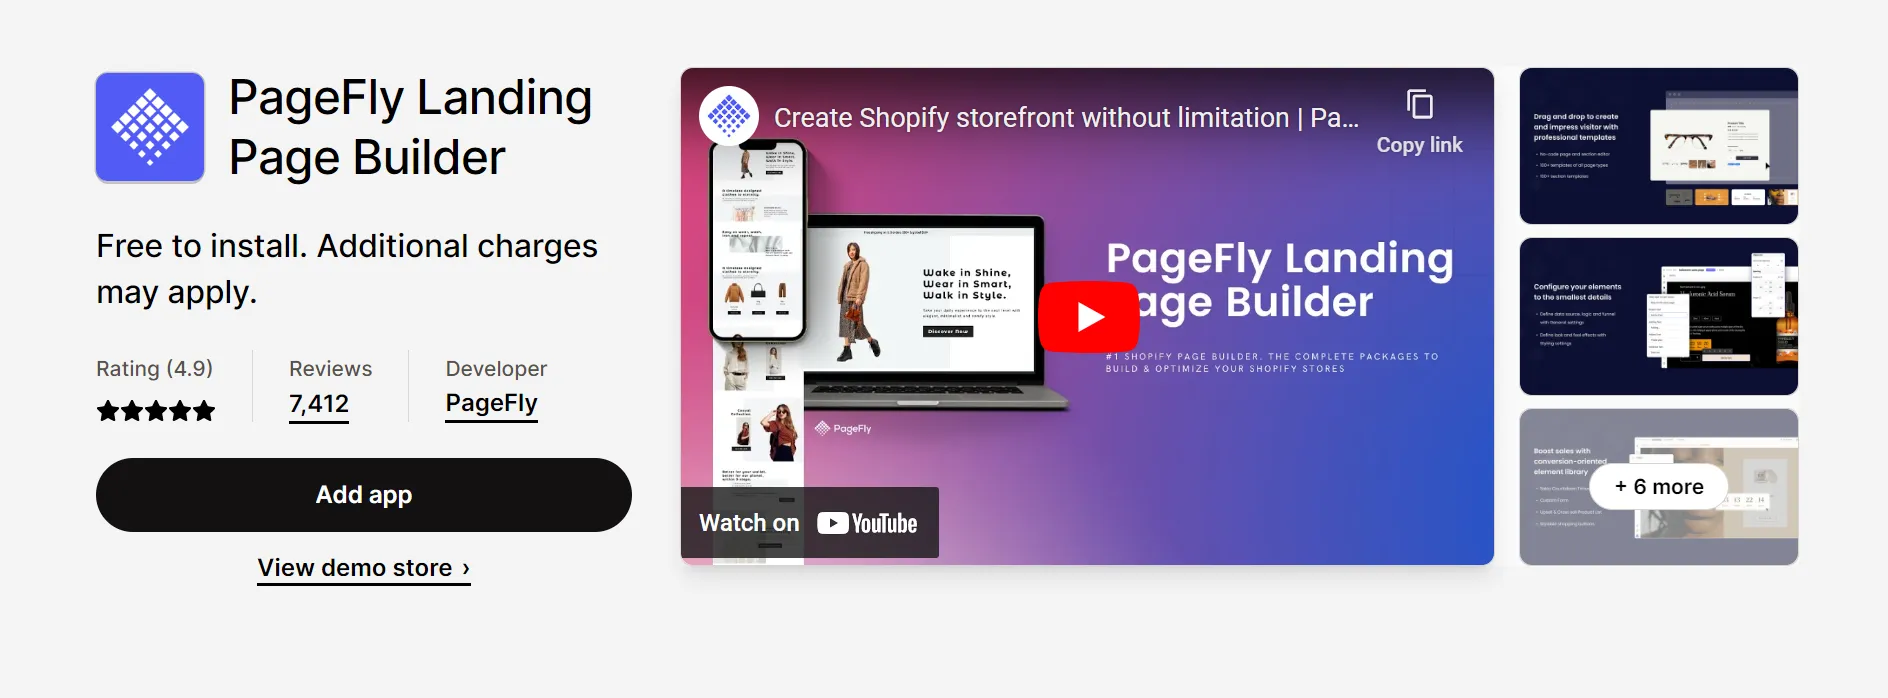 Free Shopify apps PageFly